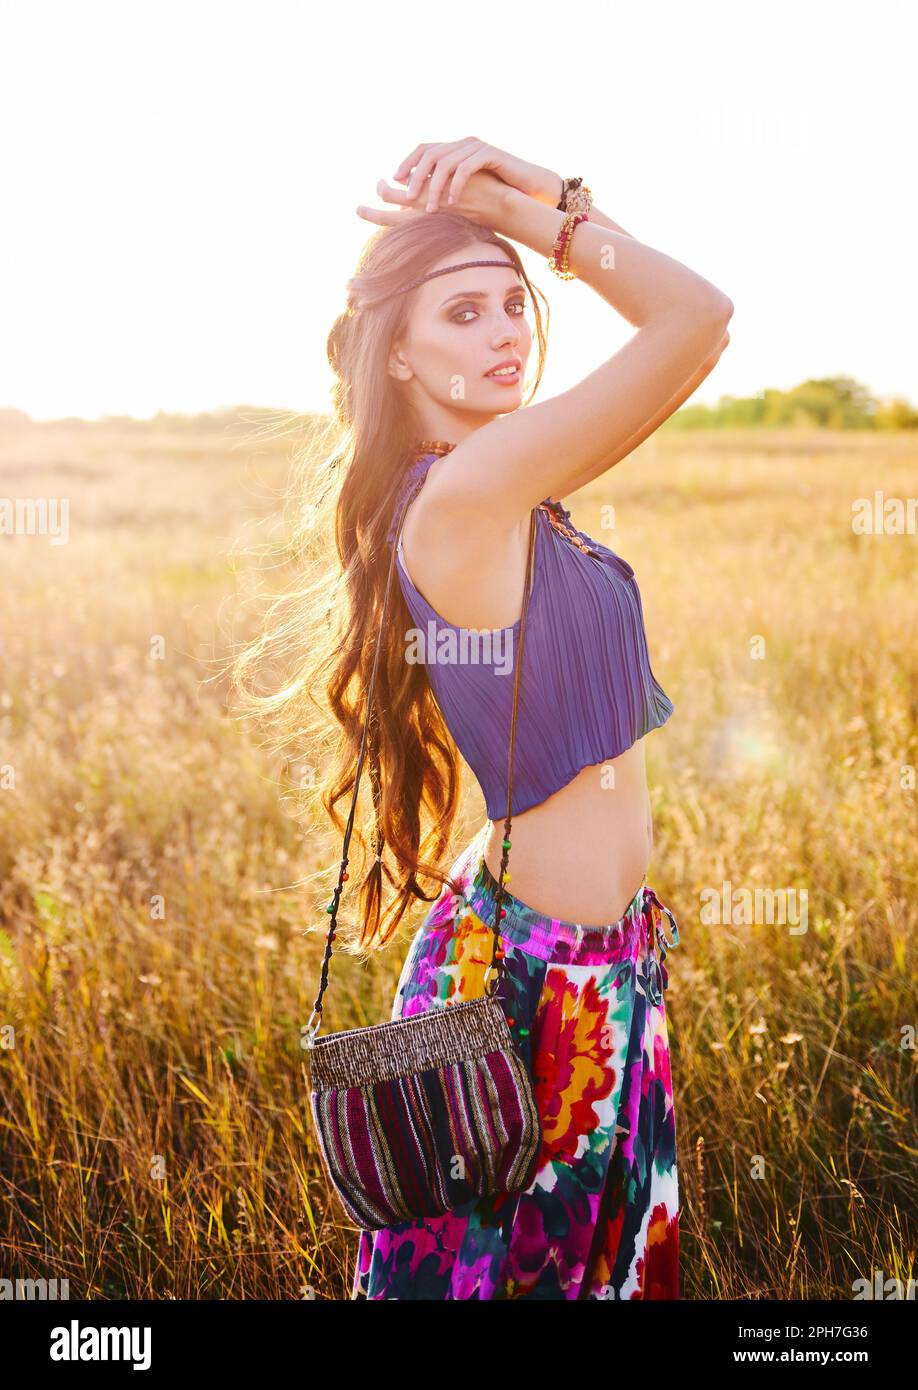 Outdoor portrait of the smiling beautiful young boho (hippie) girl in field Stock Photo